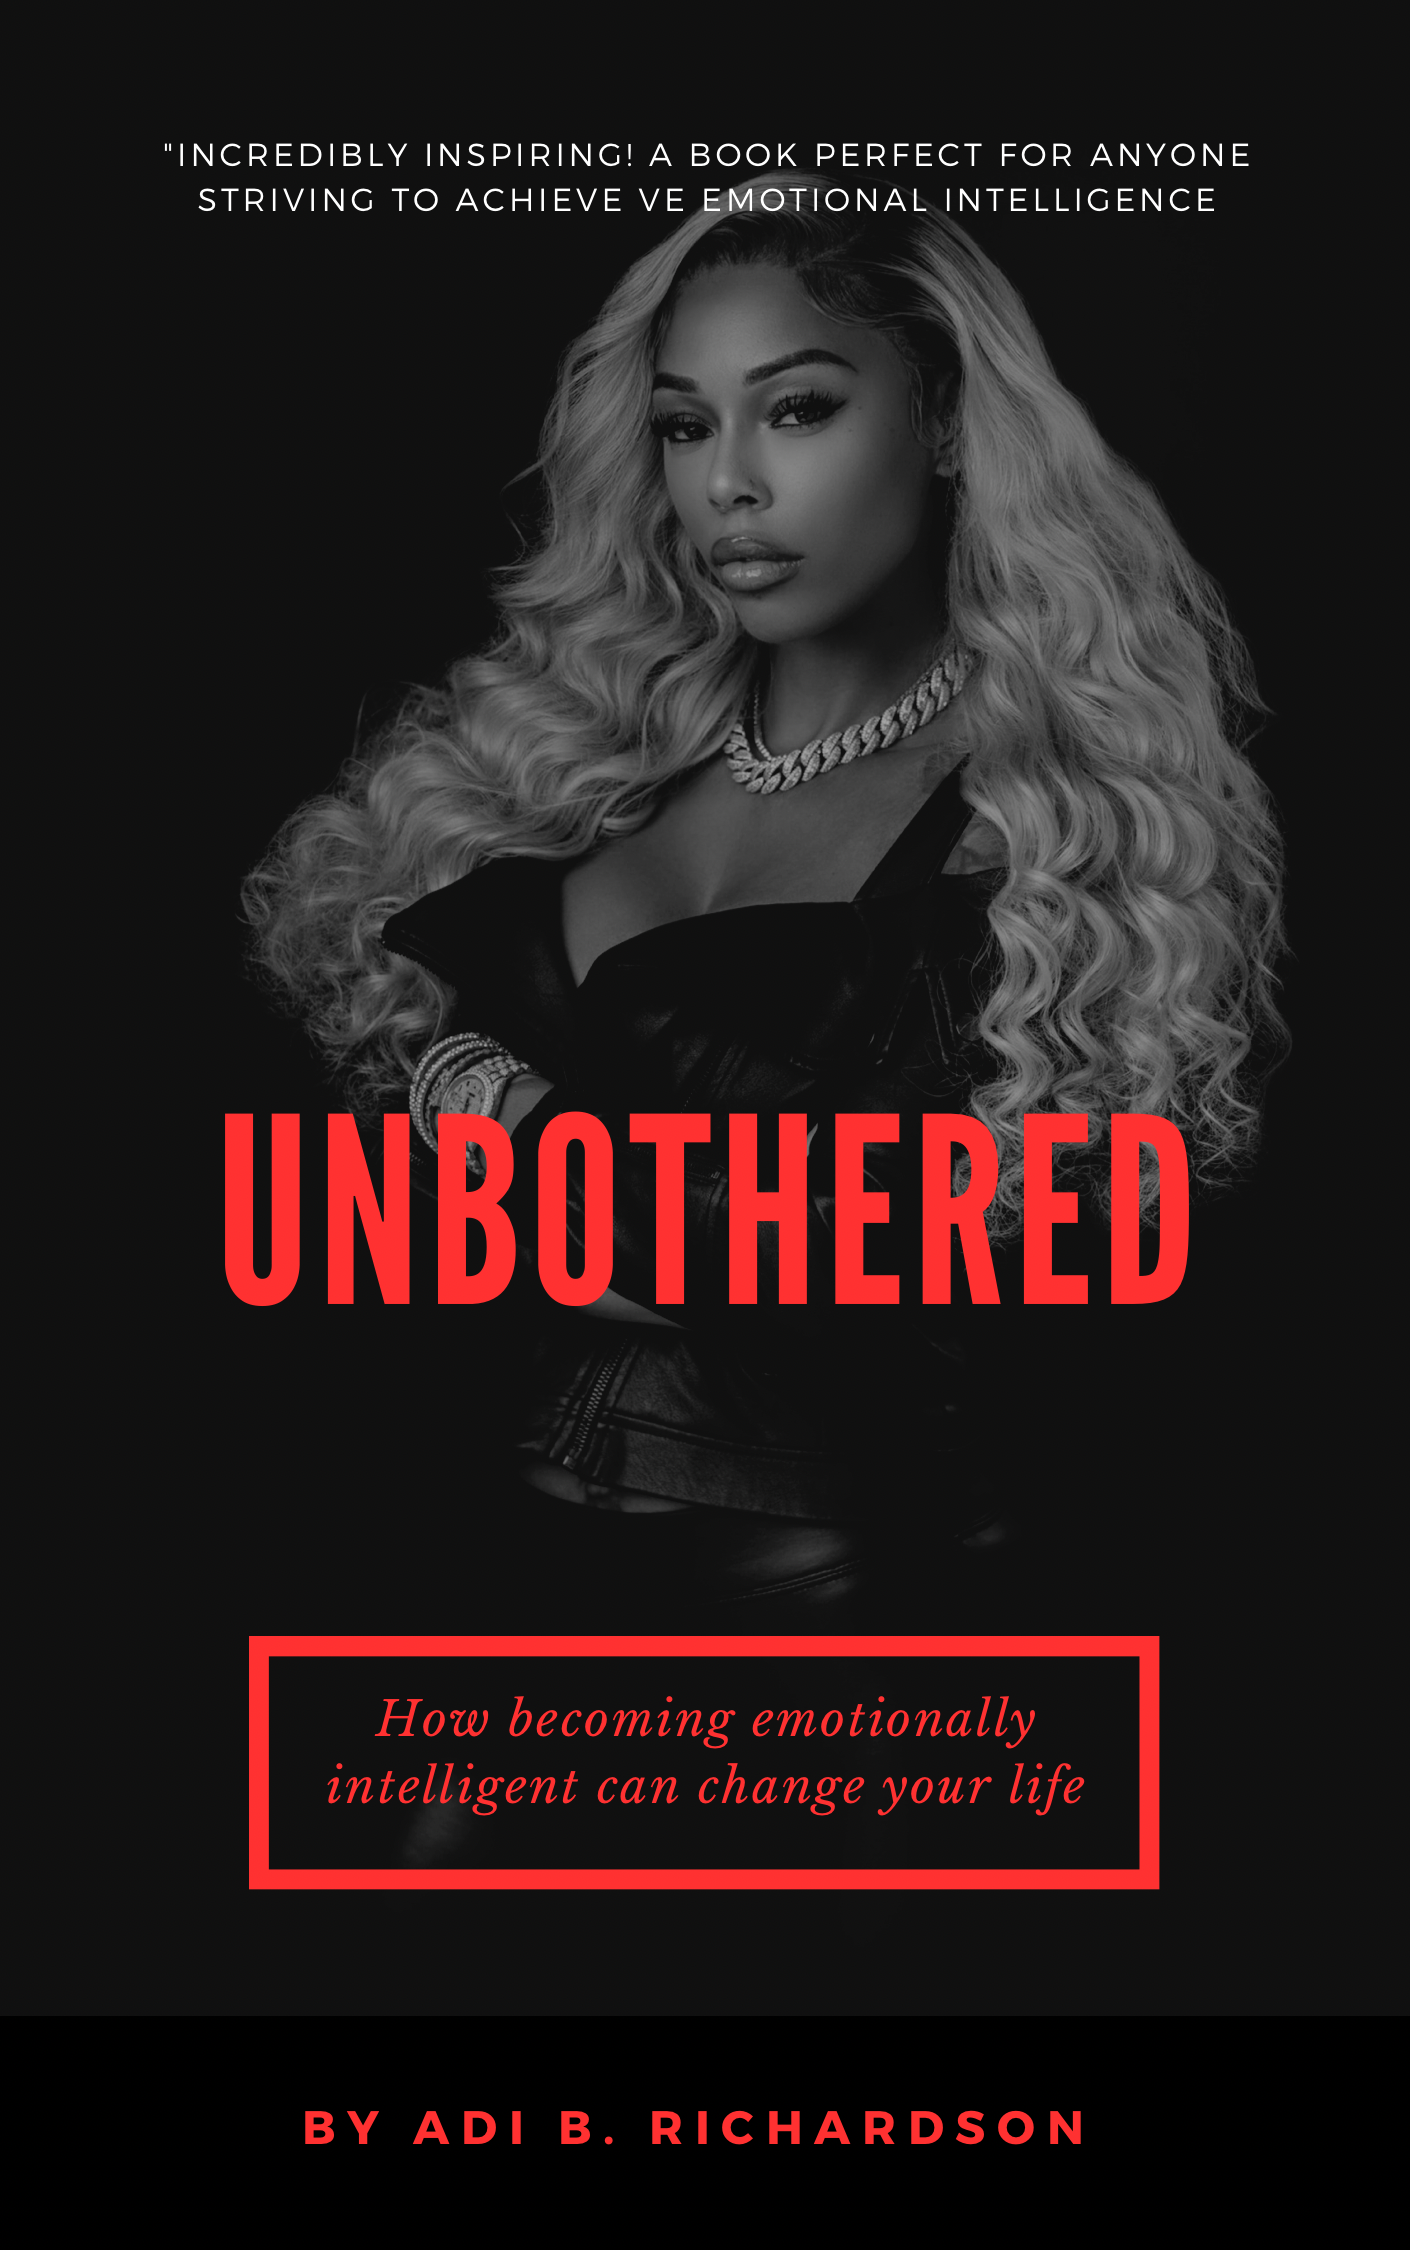 PREORDER Unbothered (Becoming emotionally intelligent)